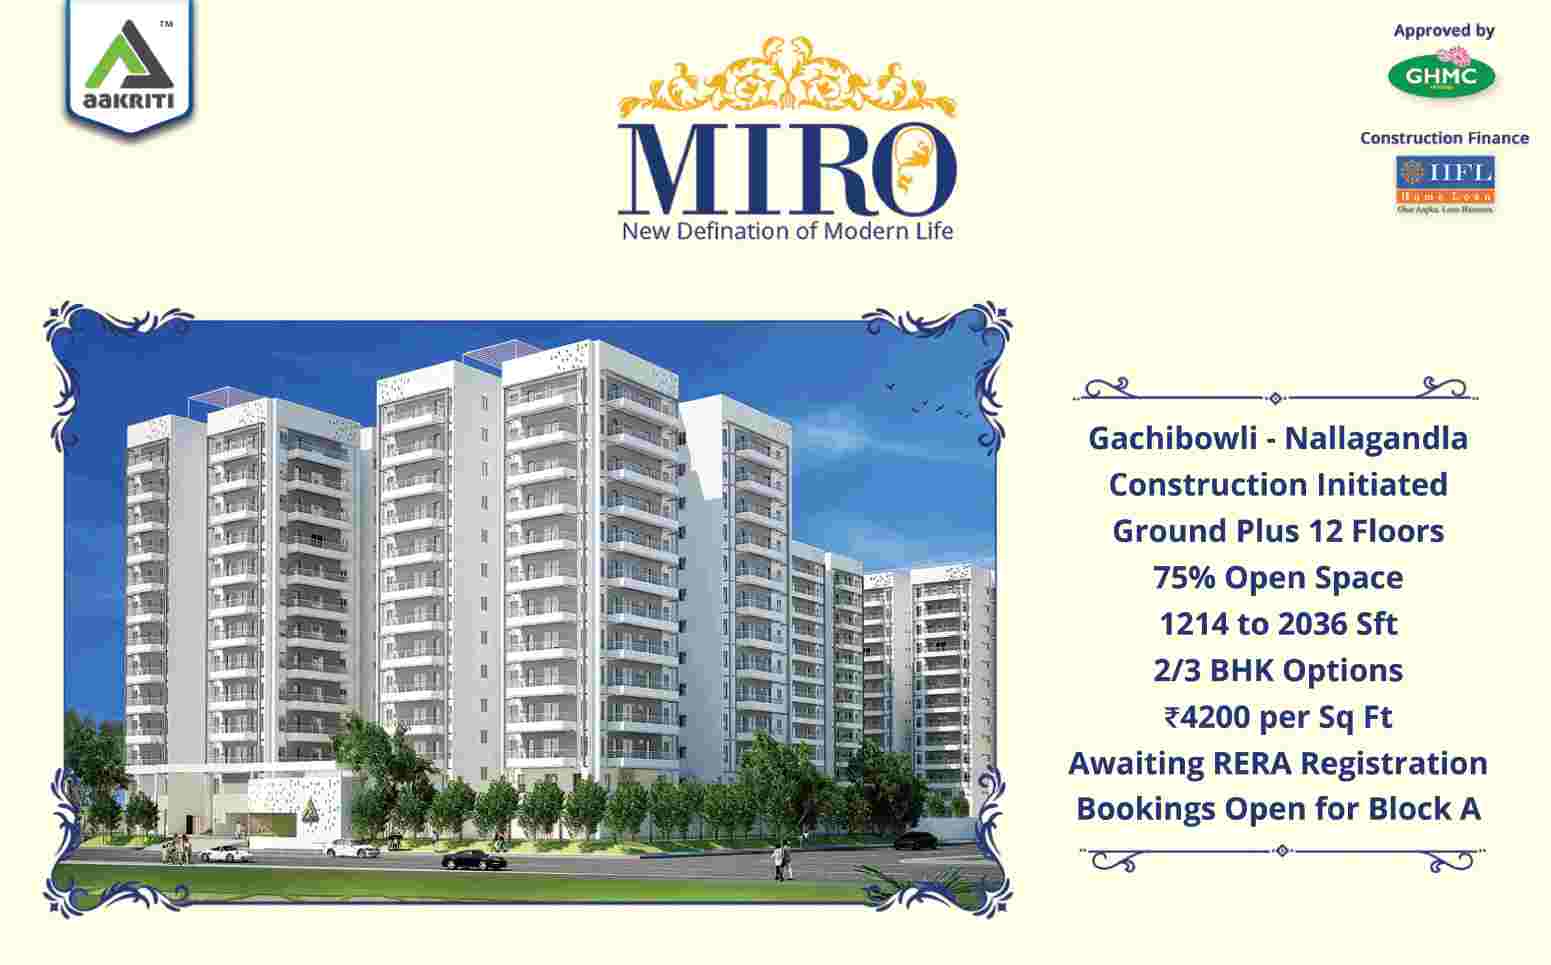 Live in the new definition of modern life at Aakriti Miro in Hyderabad